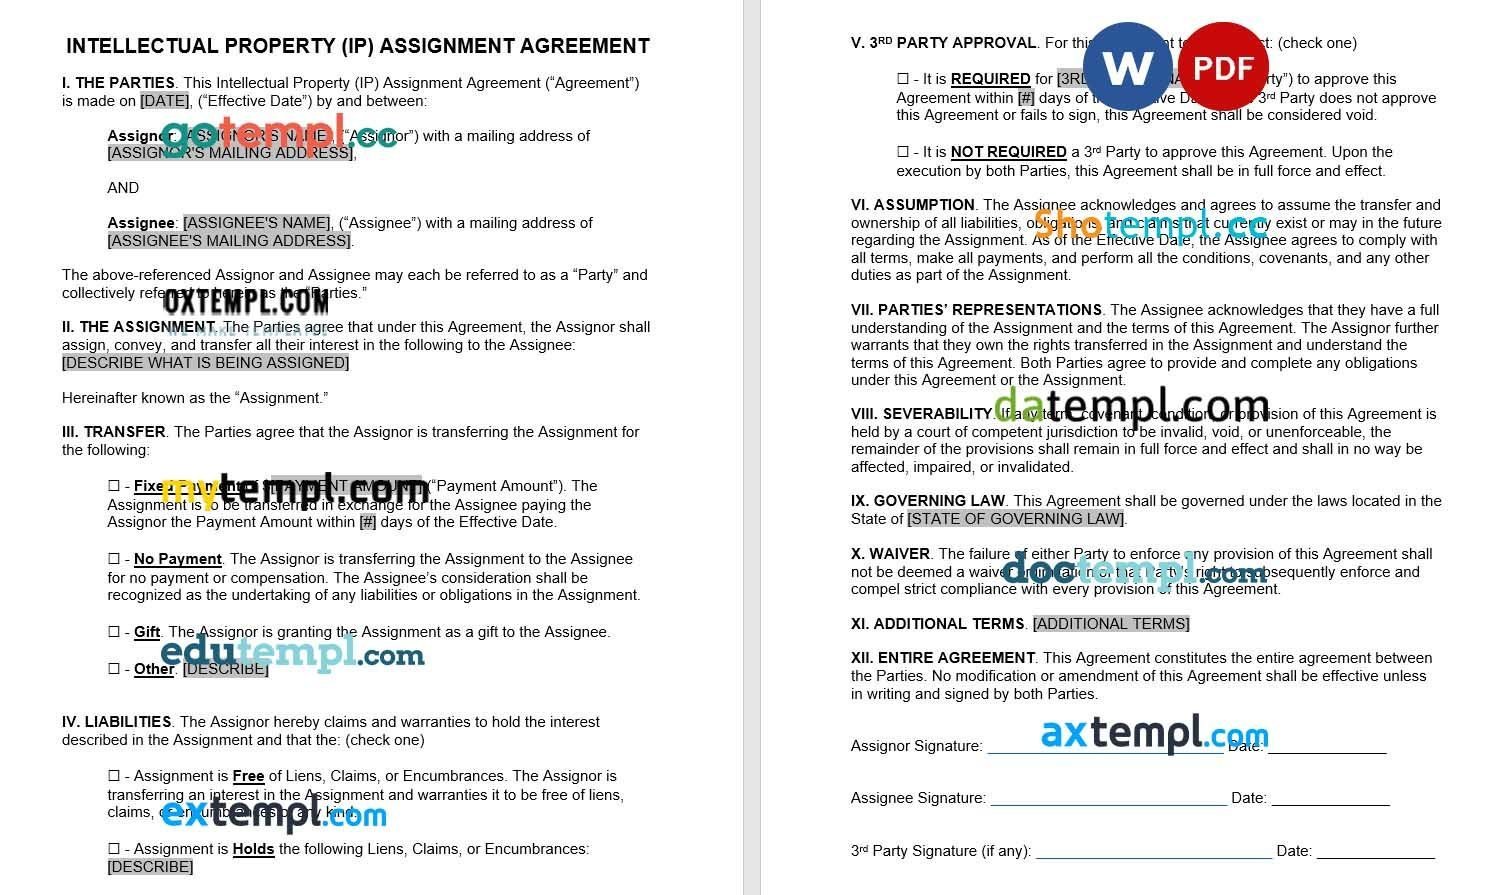 Intellectual Property Assignment Agreement Form example, fully aditable